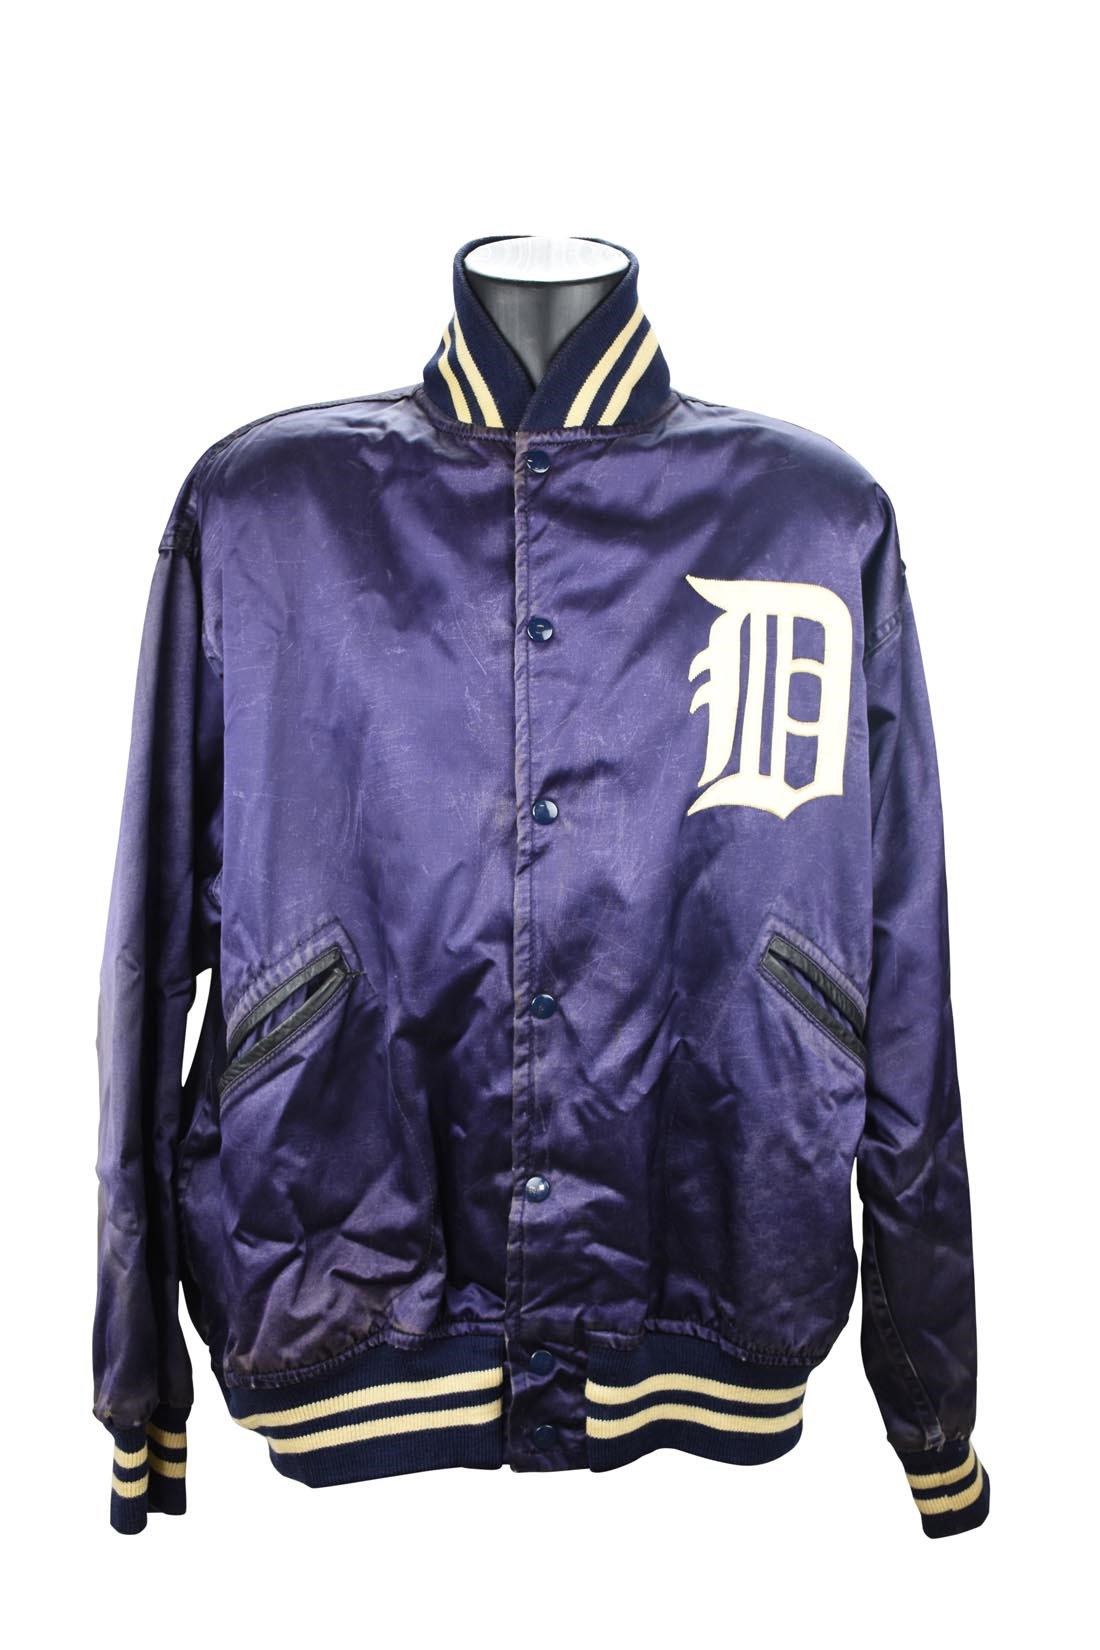 - Circa 1968 Mickey Lolich Detroit Tigers Satin Jacket with Provenance